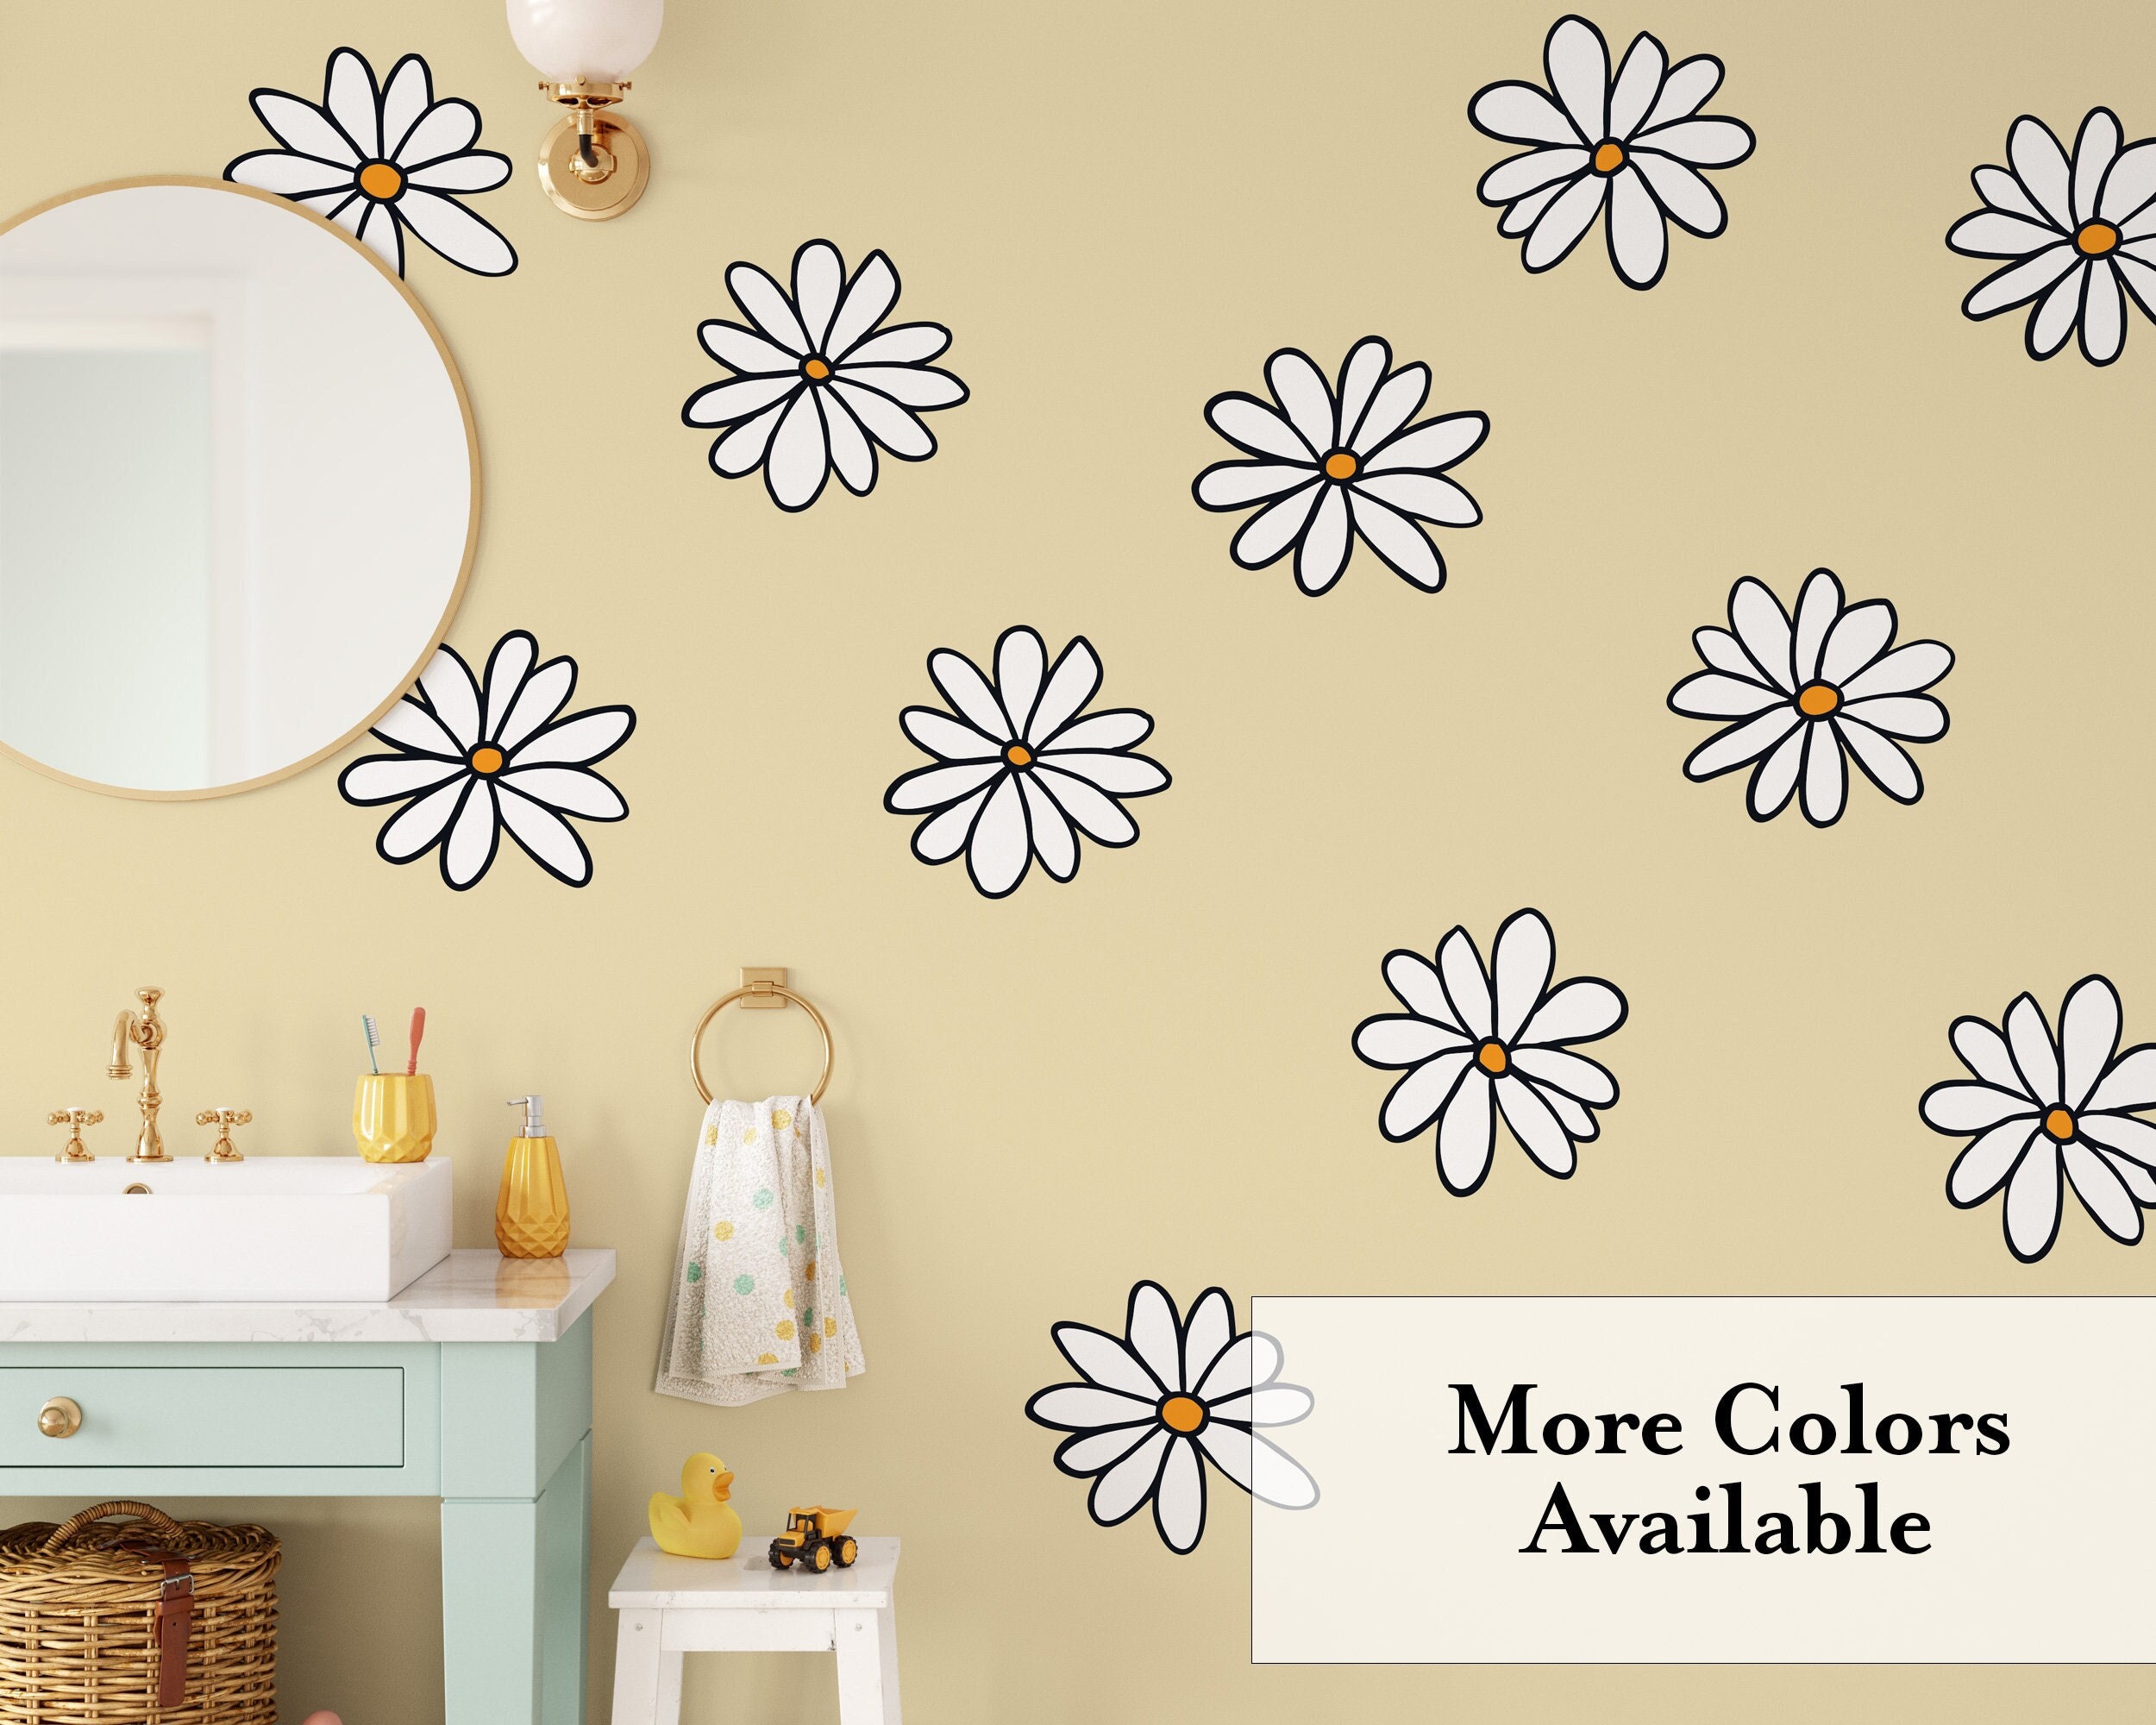 Sticker Pack / 60 Pc. Vintage Style Botanical Stickers Flowers